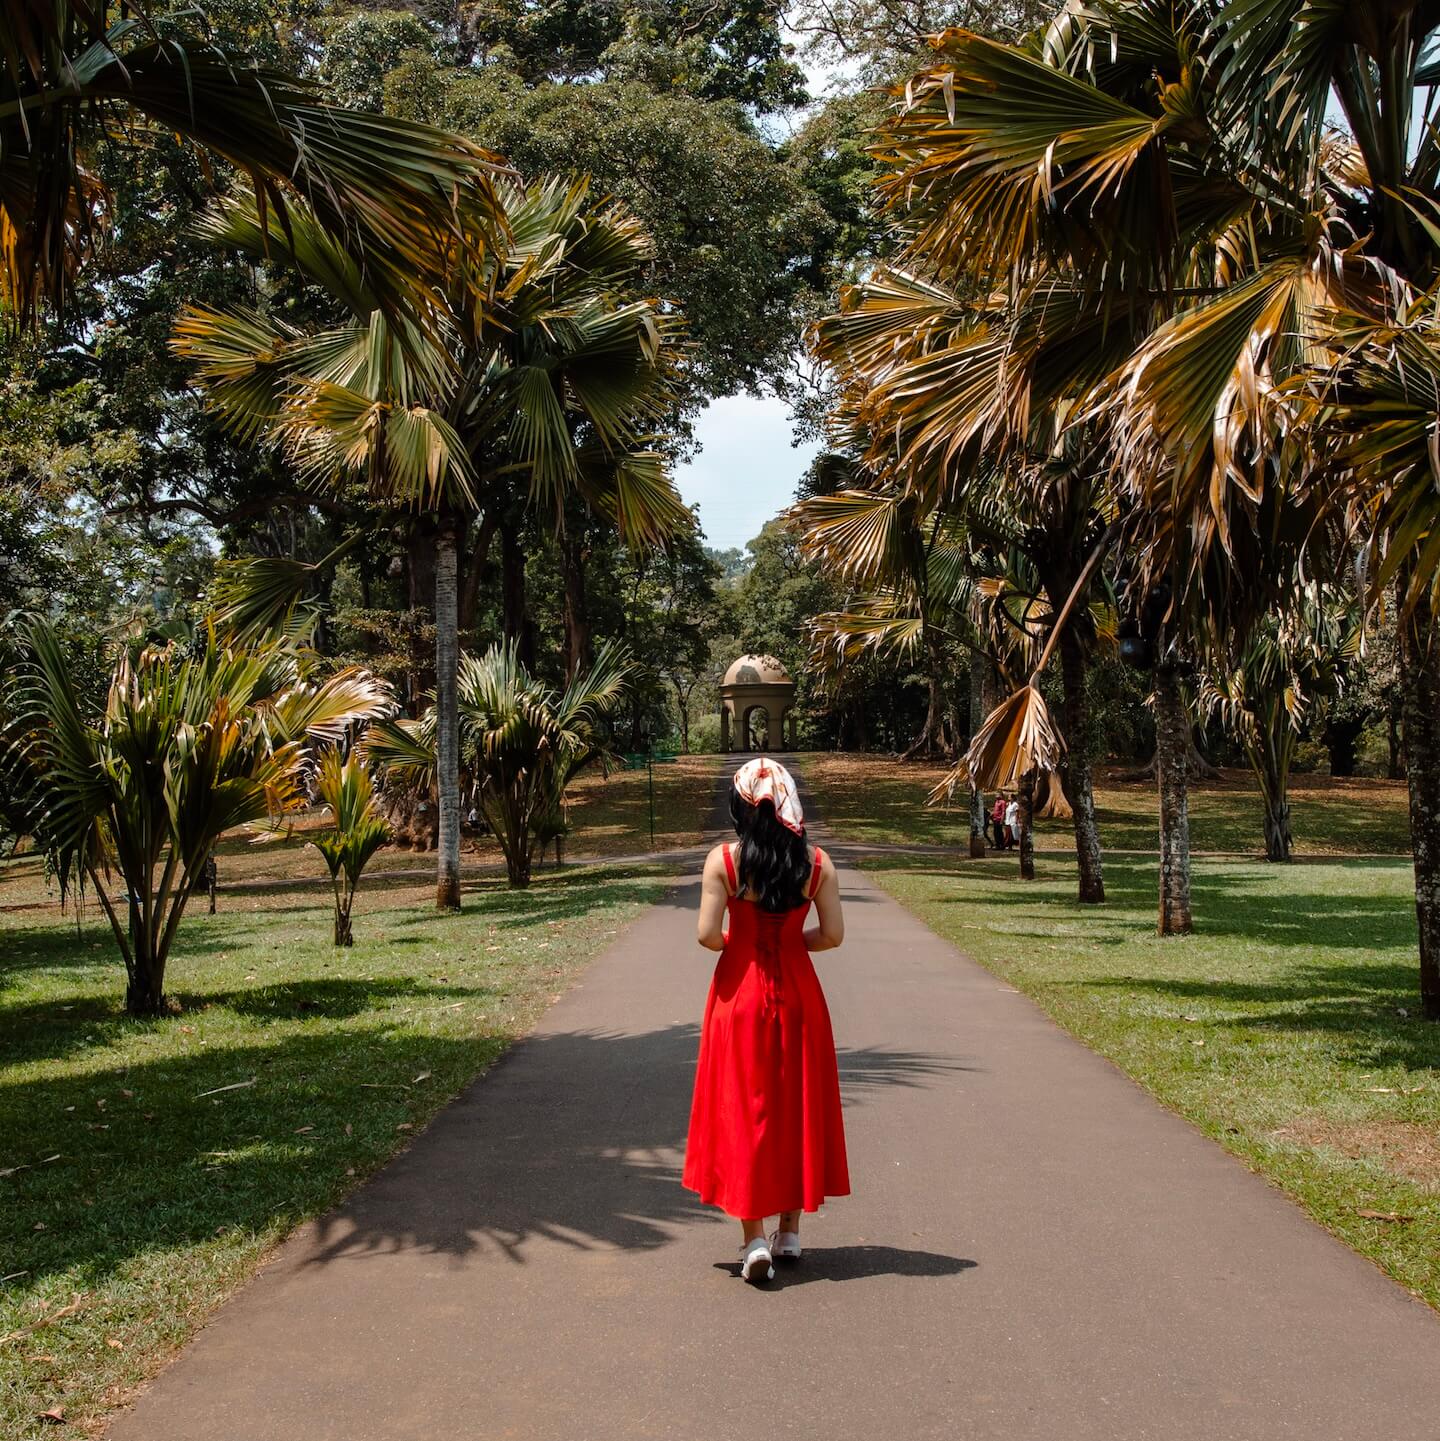 Girl in red dress surrounded by palms walking in the botanical garden in Kandy Sri Lanka.